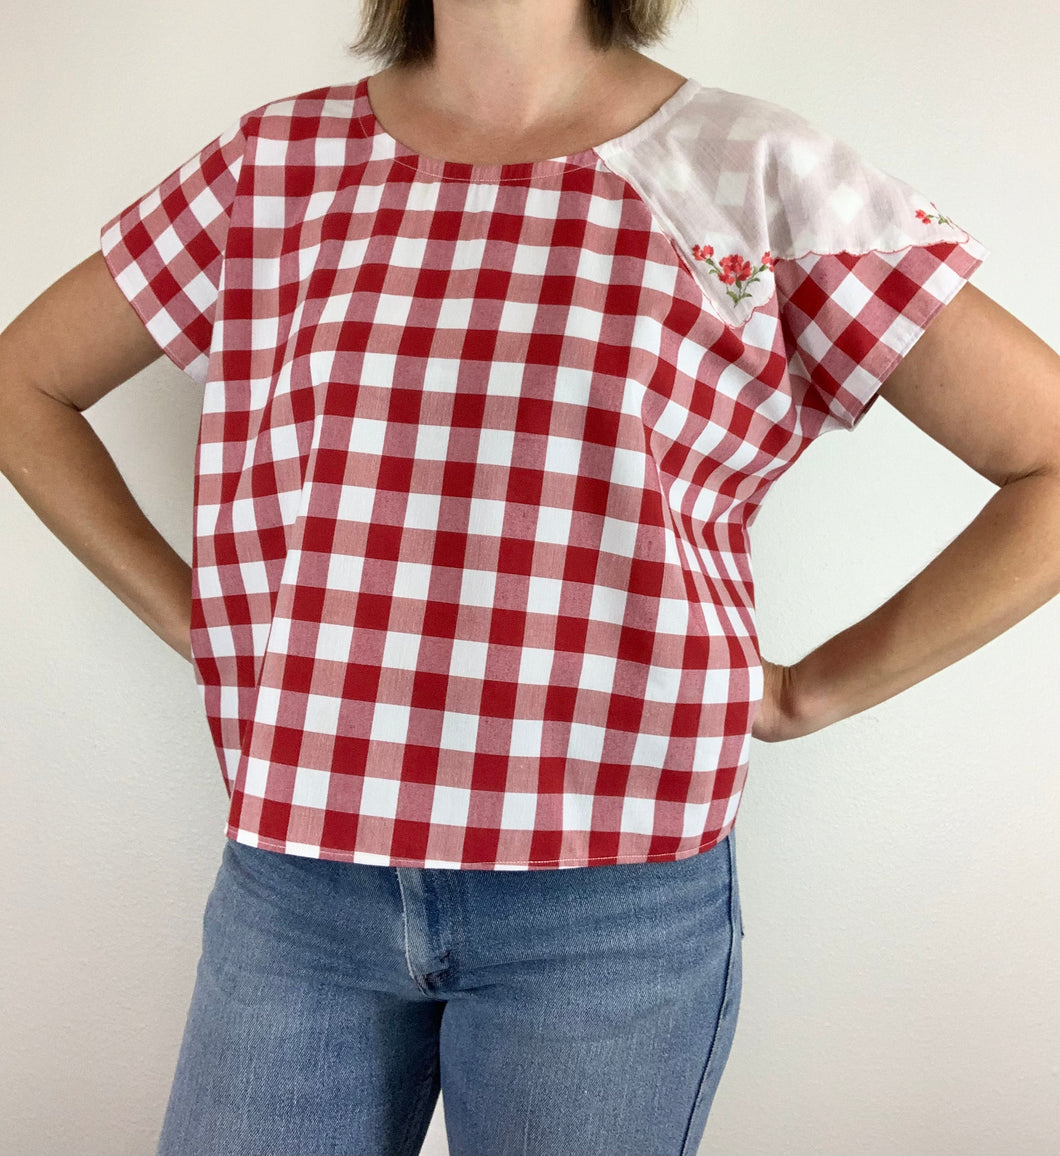 Picnic in the park Top